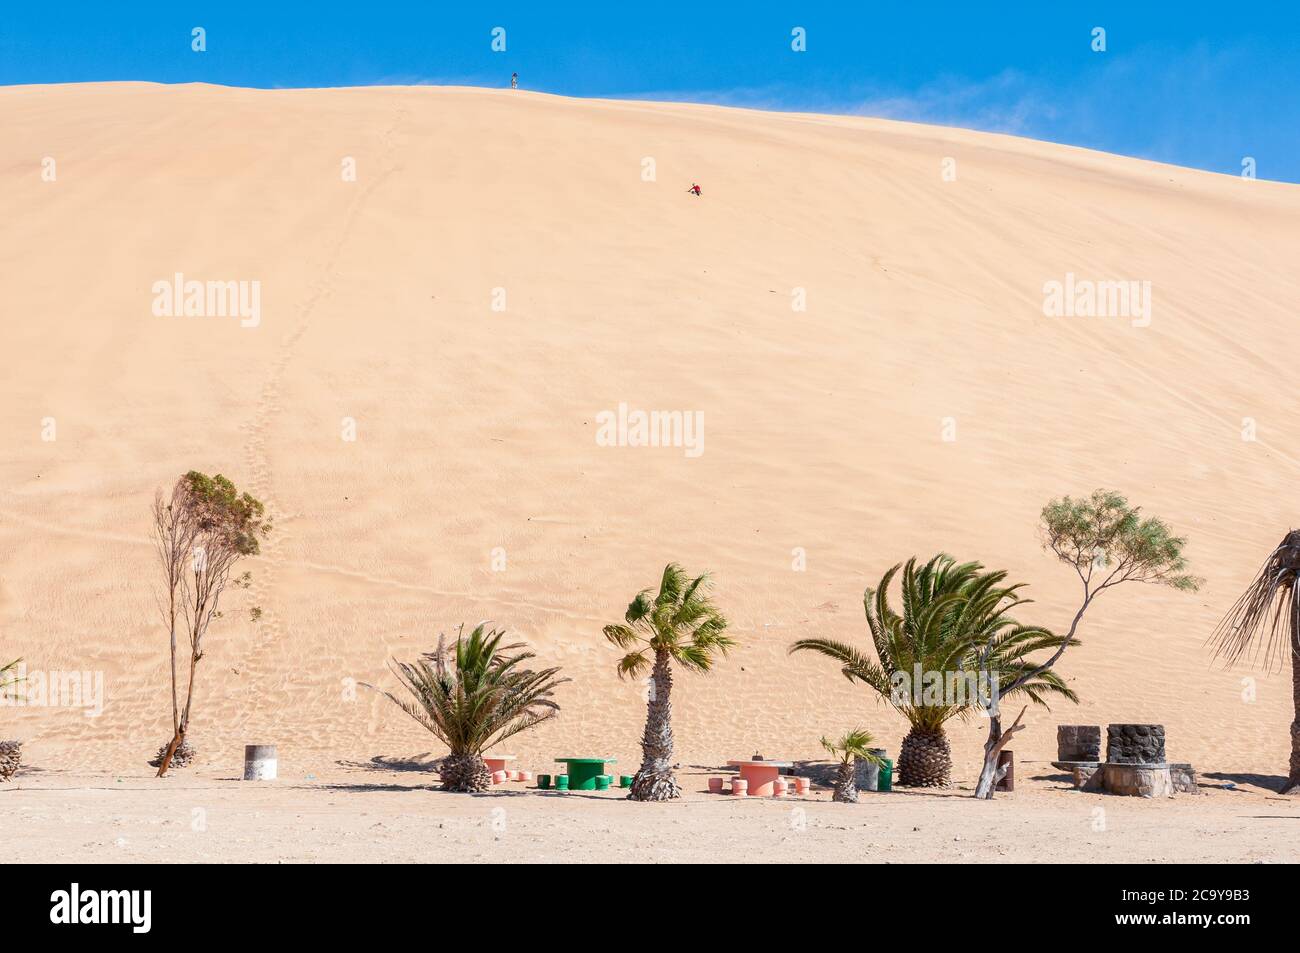 People are visible on Dune 7 at Walvis Bay on the Atlantic Ocean coast of Namibia Stock Photo